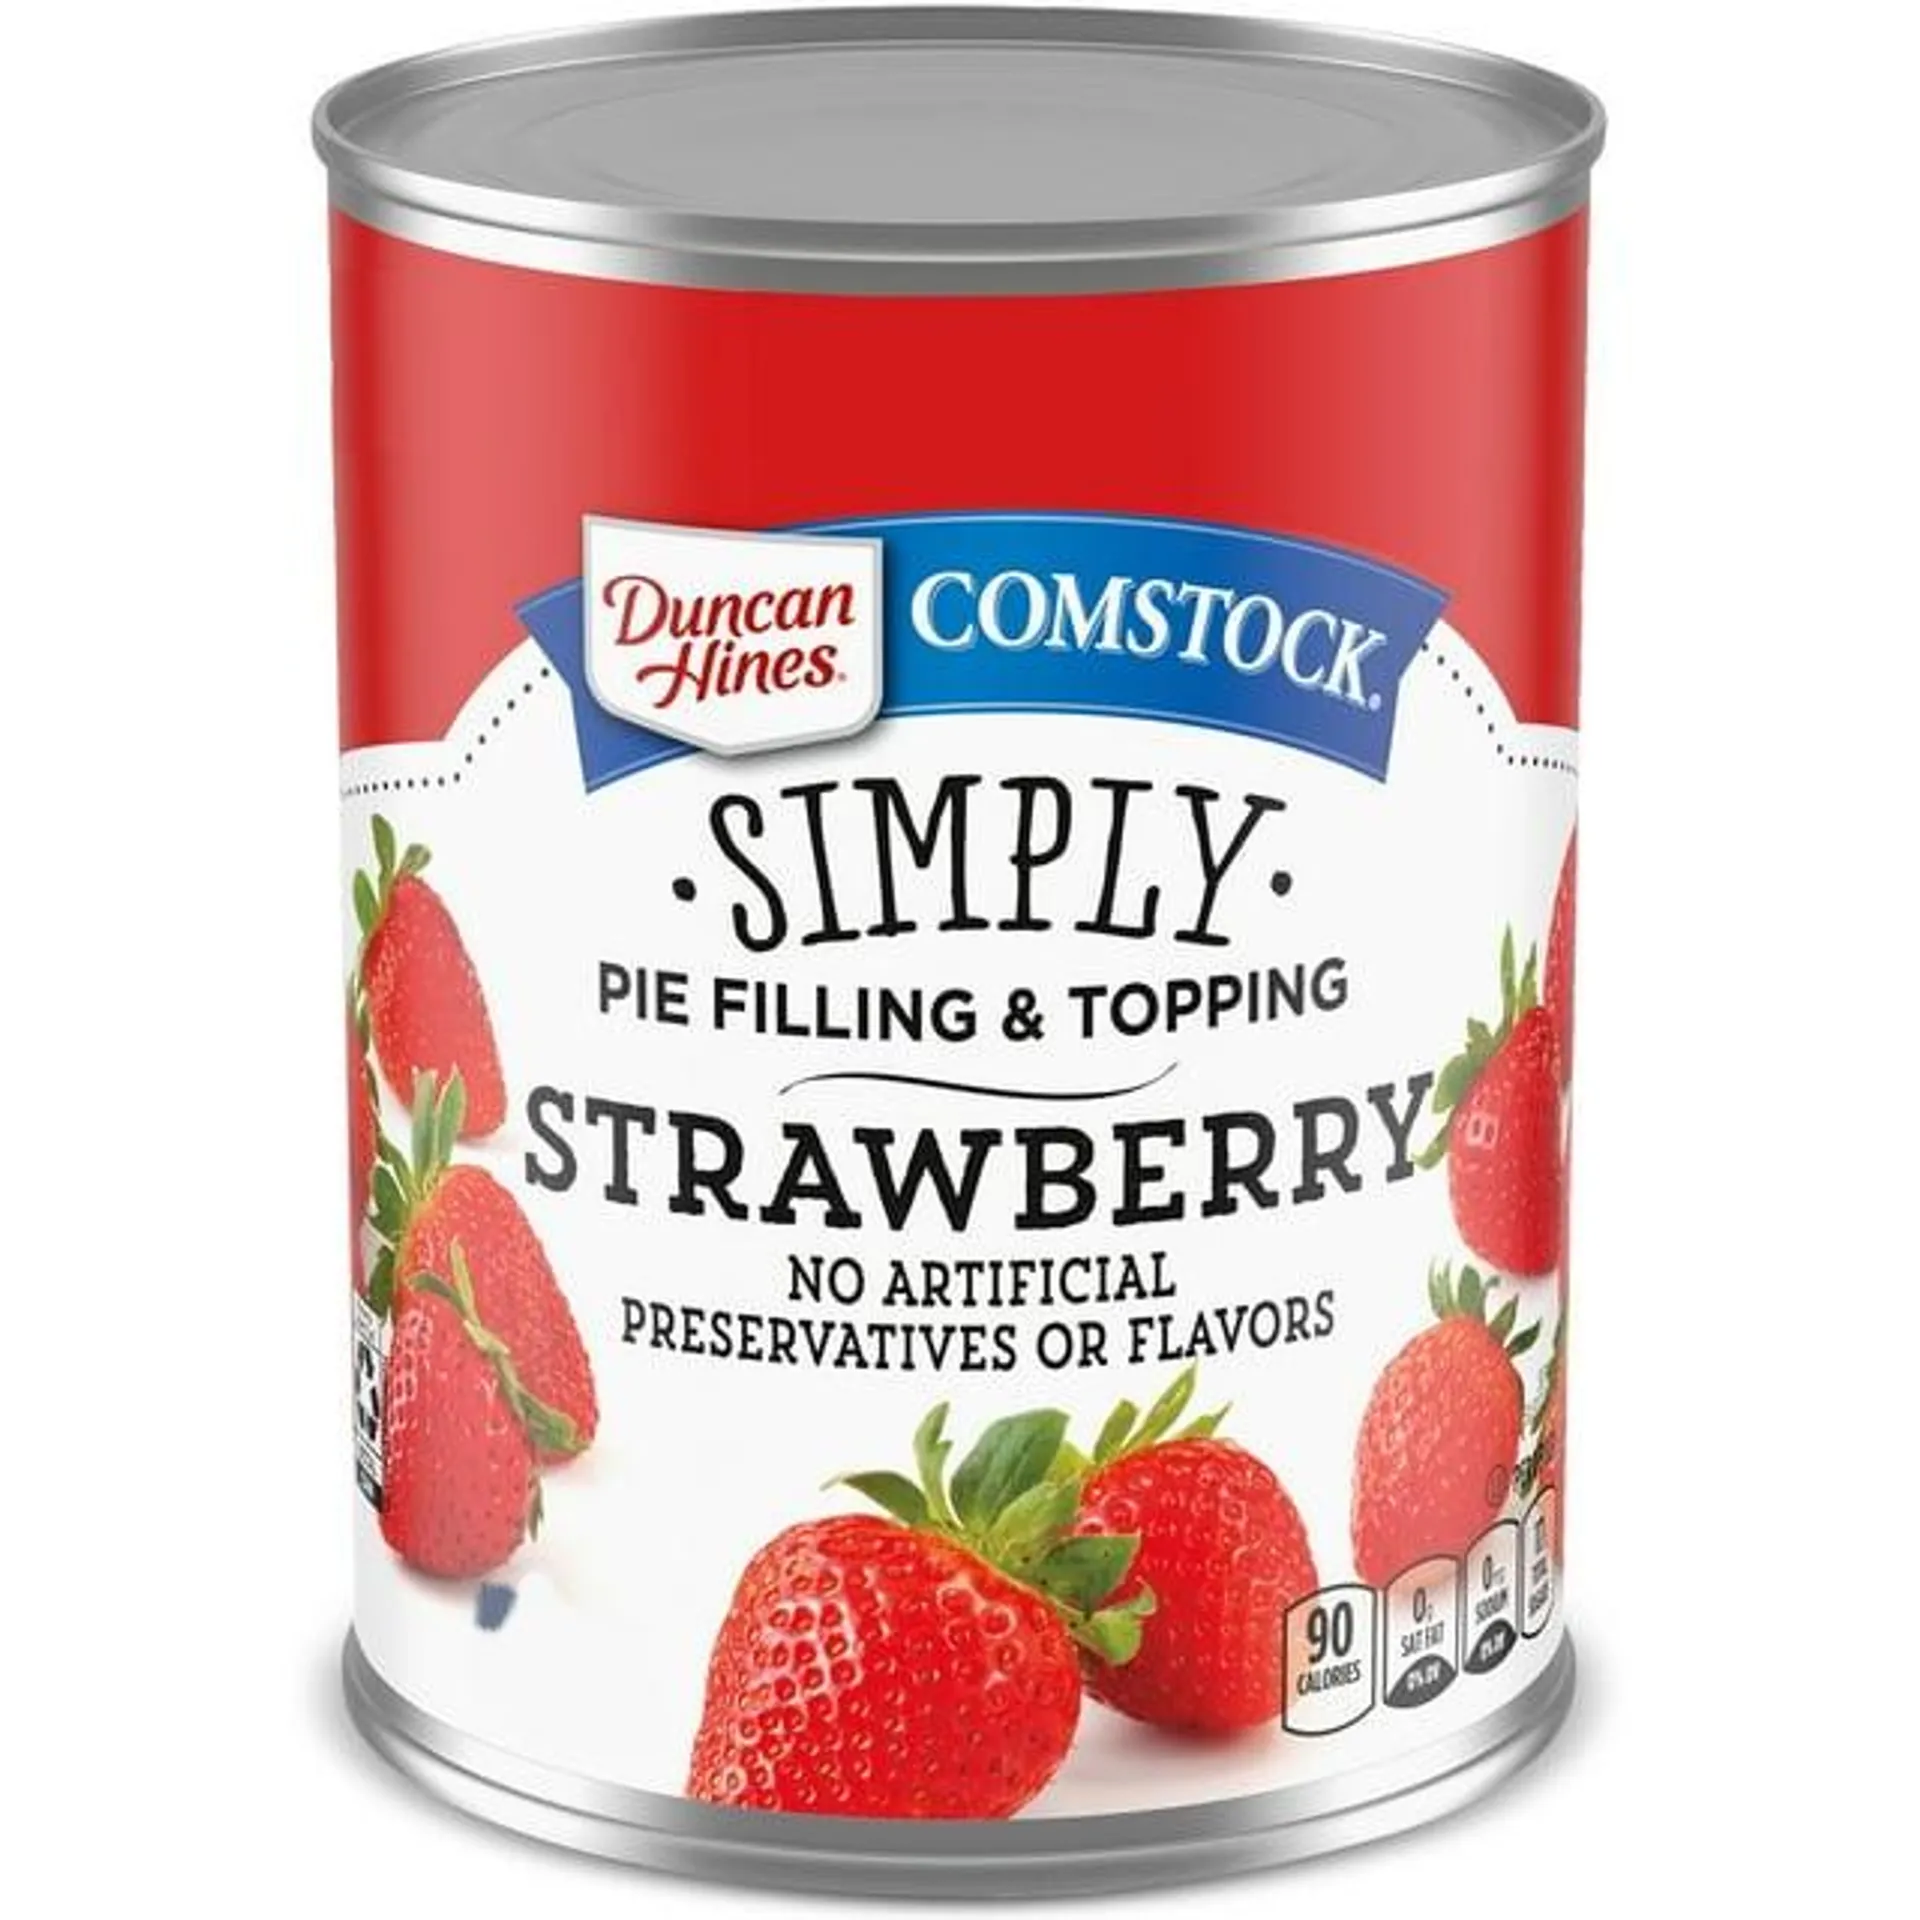 Duncan Hines Comstock Strawberry Pie Filling and Topping, 21 oz.